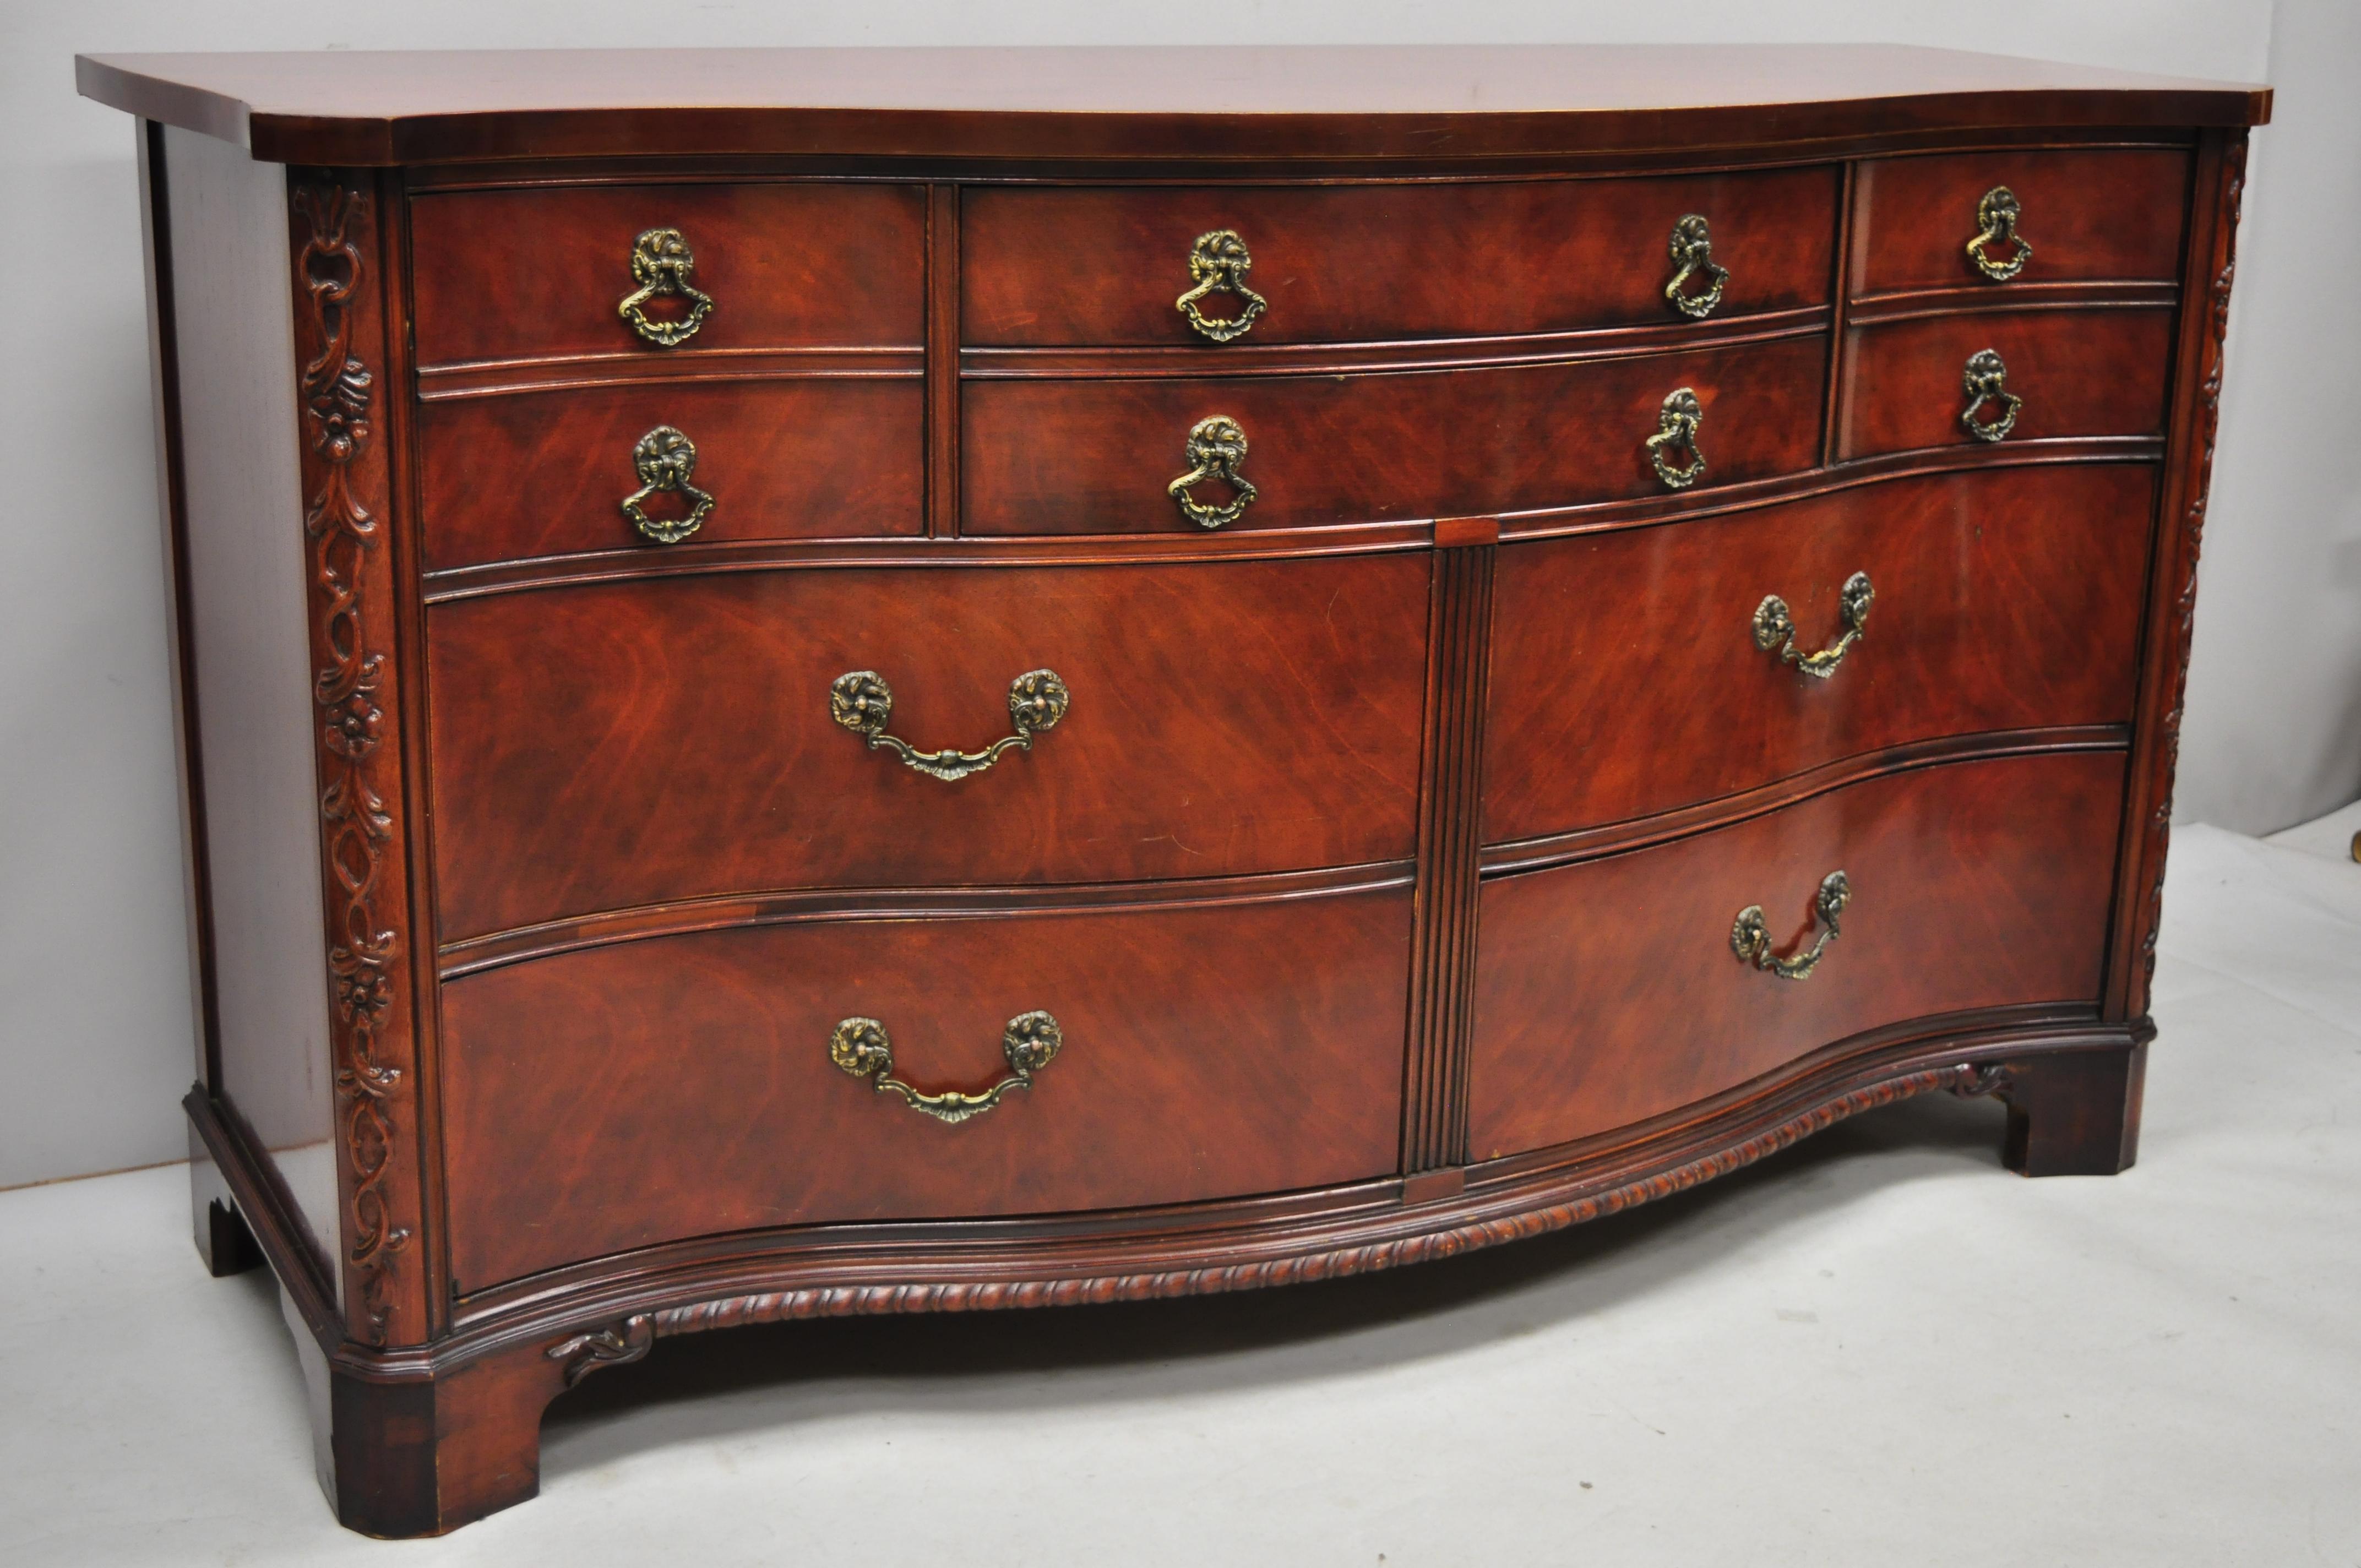 Antique mahogany Chinese Chippendale serpentine front 8 drawer long dresser by Century. Item includes serpentine front, floral carved sides, beautiful wood grain, nicely carved details, original stamp, 8 dovetailed drawers, solid brass hardware,